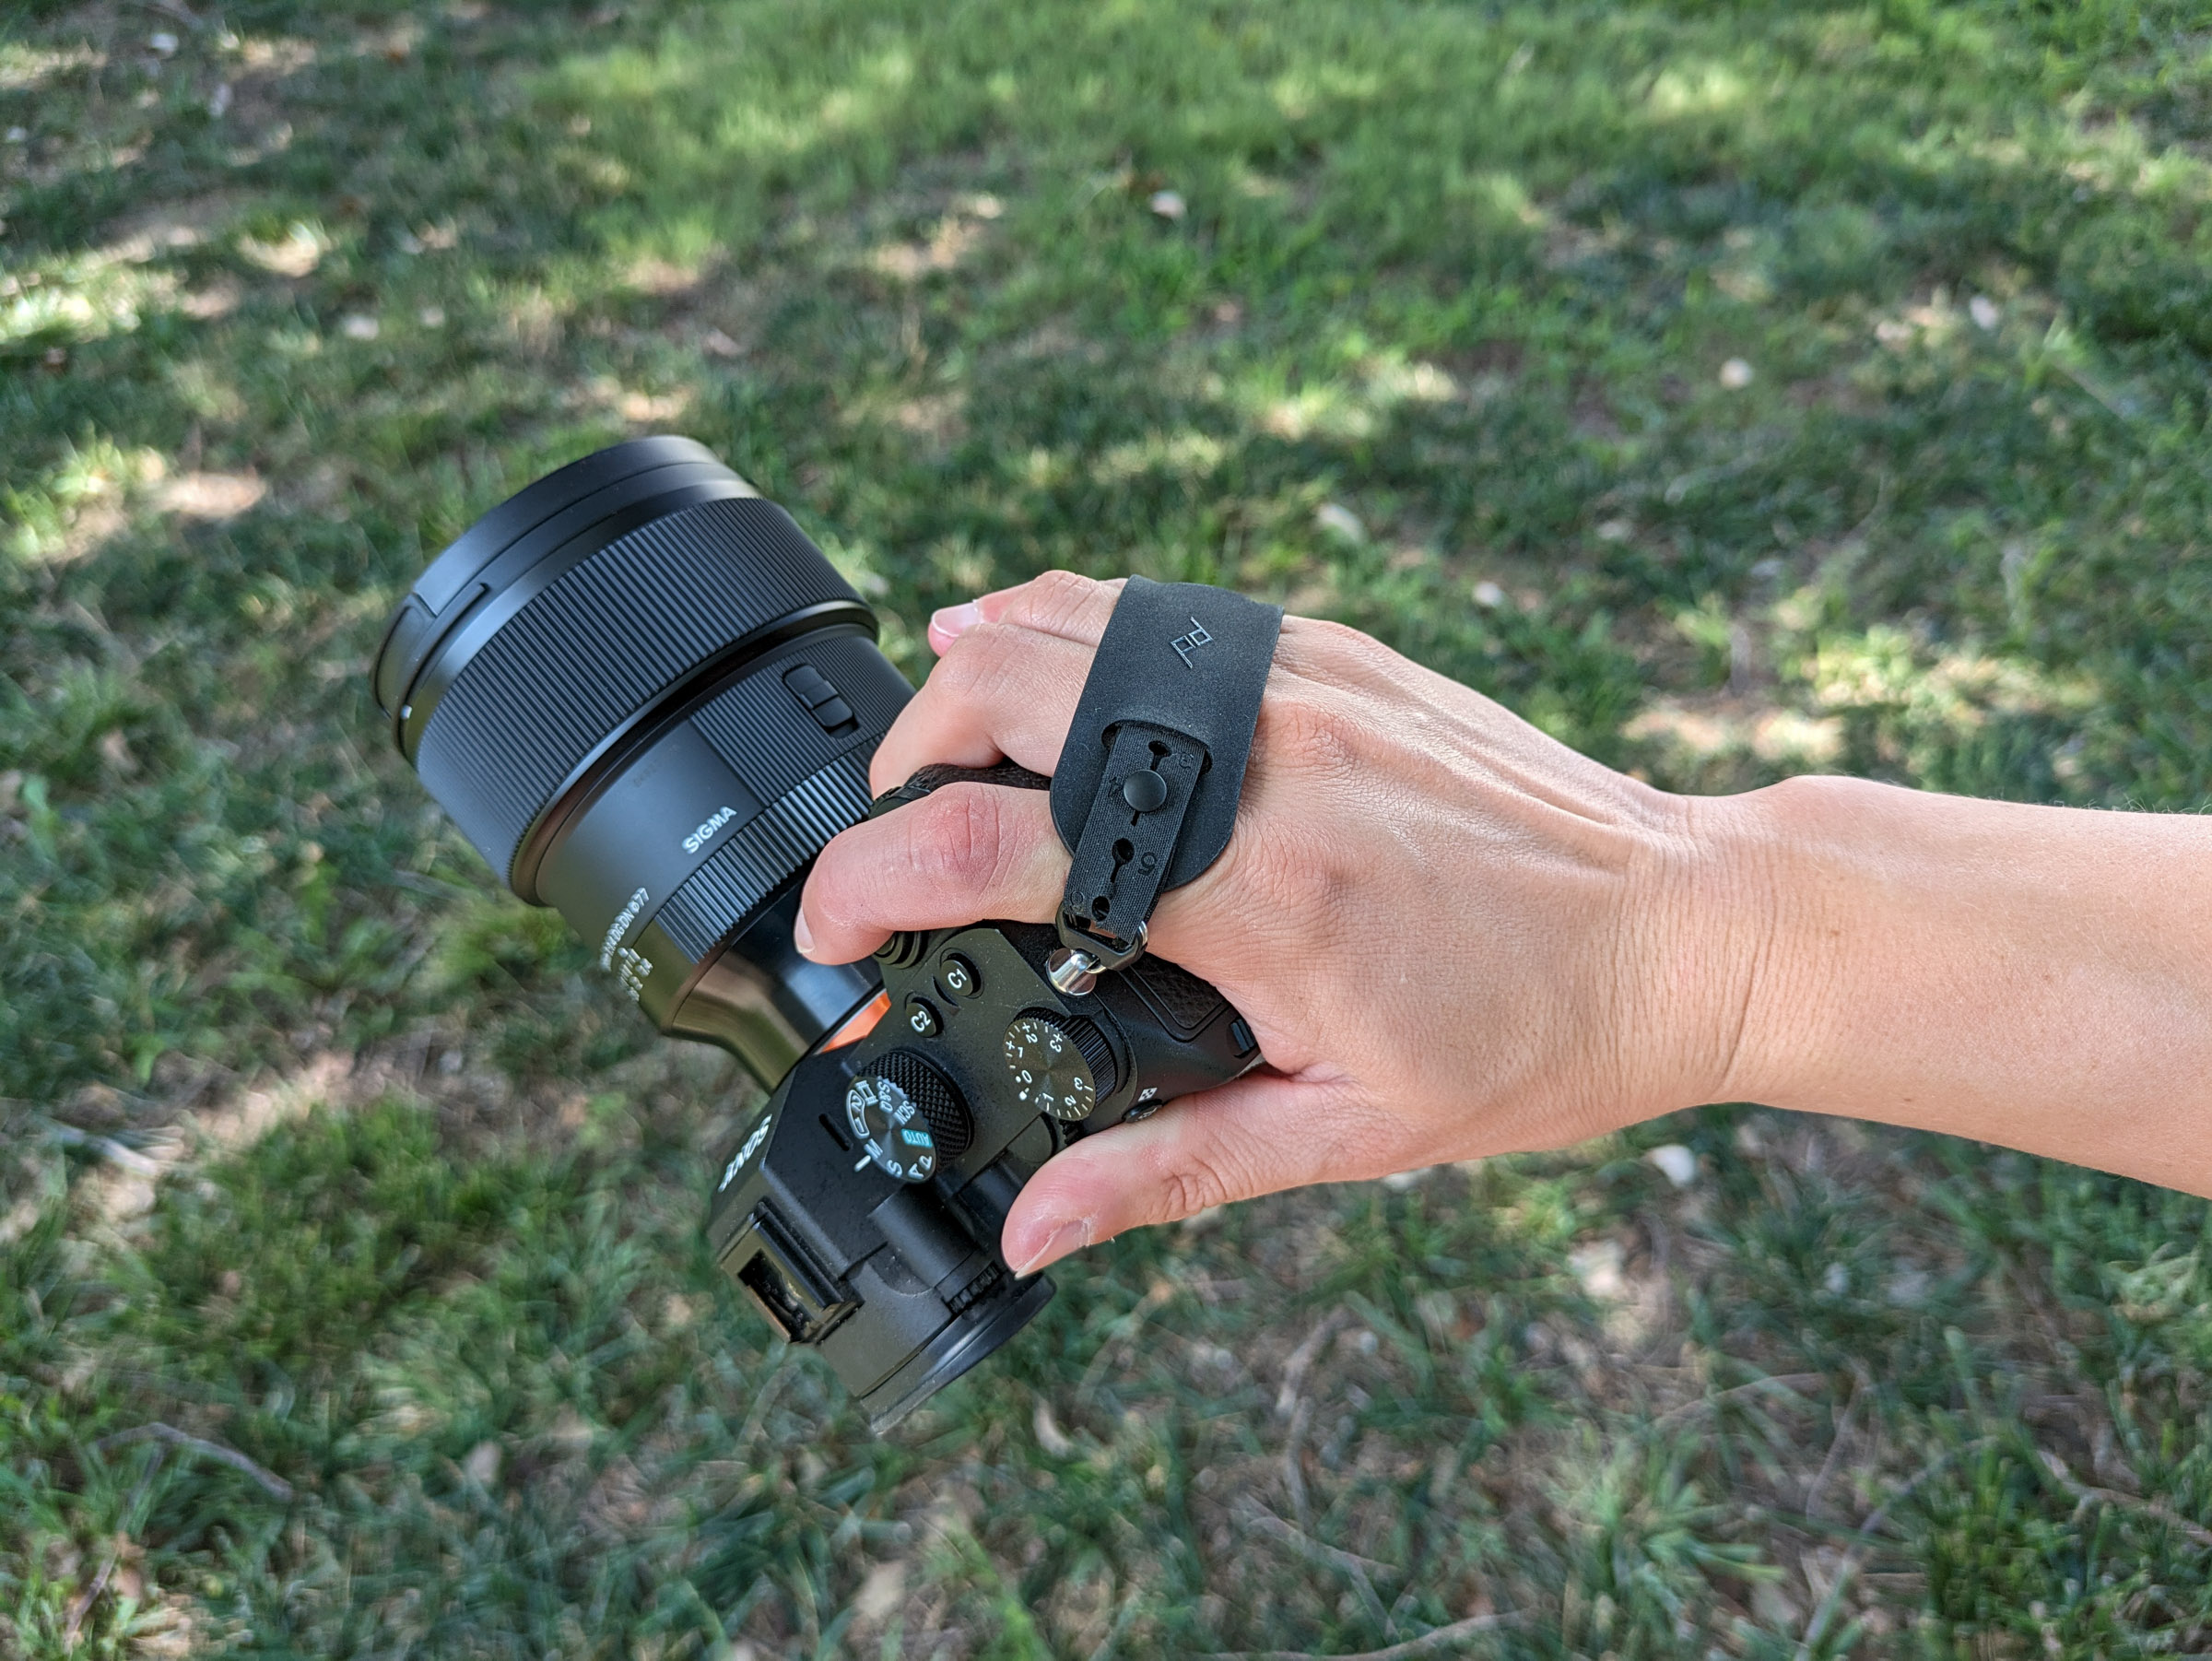 Hands-on with the Peak Design Micro Clutch | Popular Photography